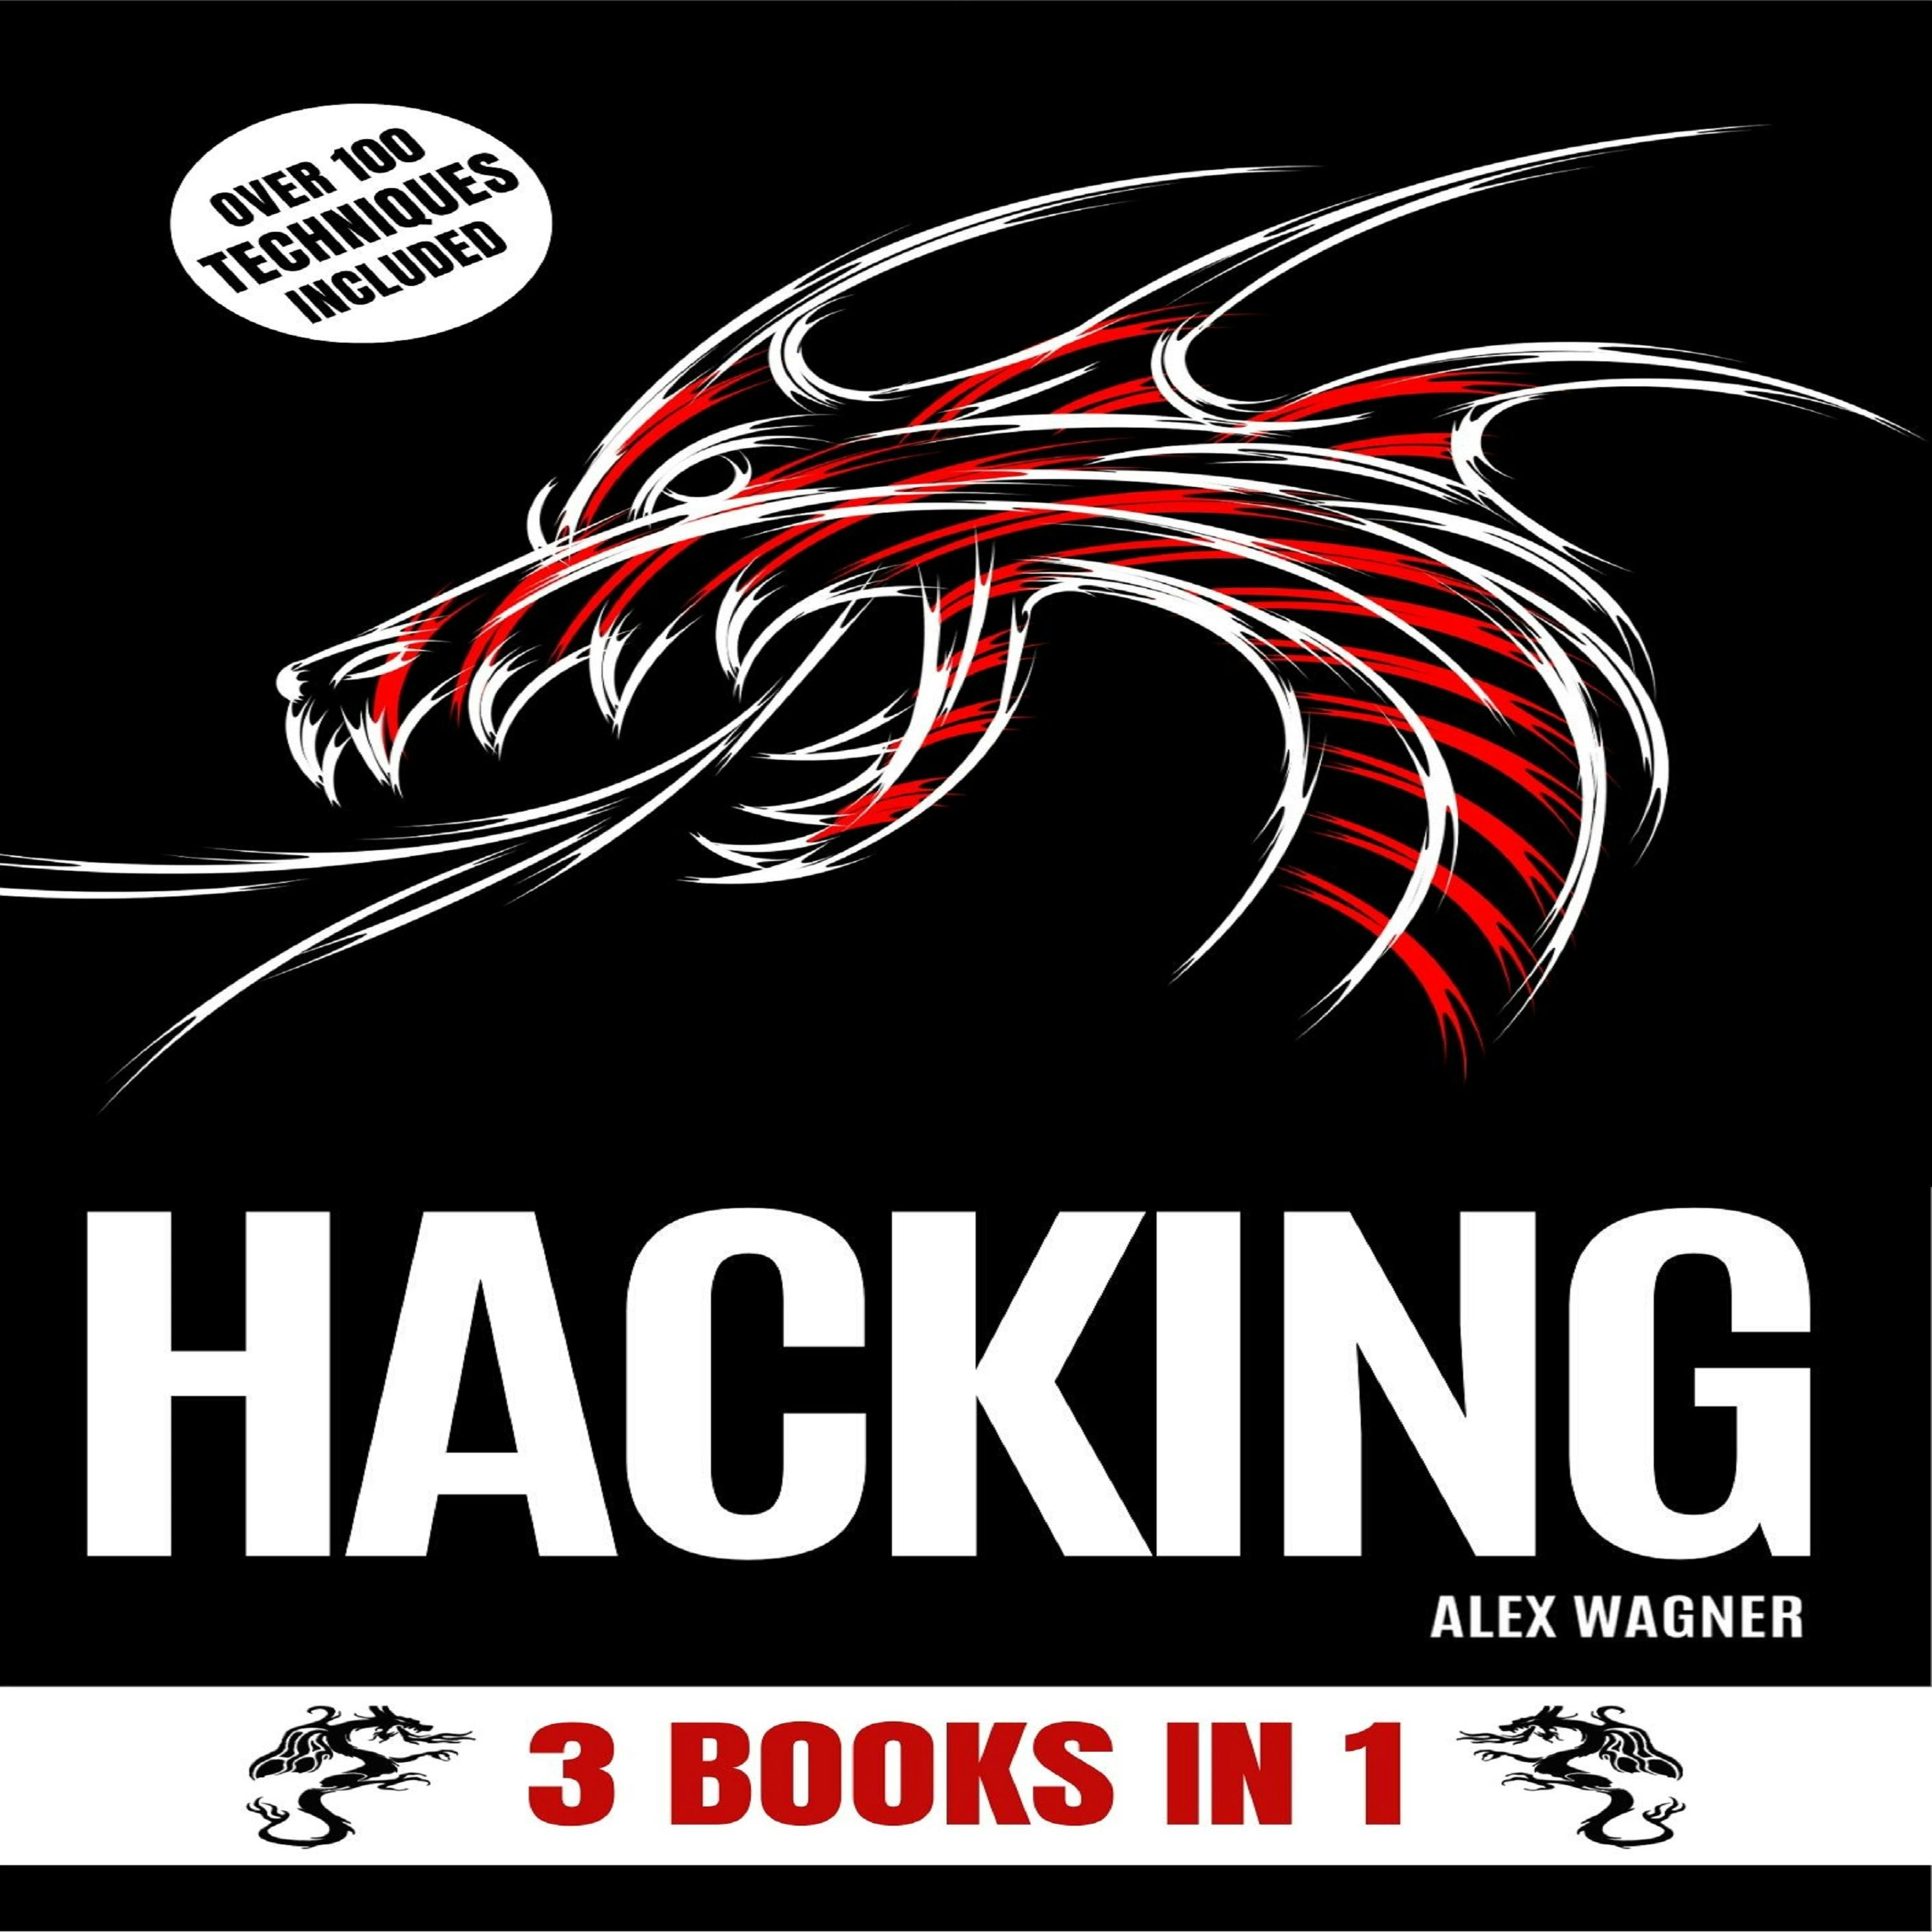 HACKING: 3 BOOKS IN 1 - Alex Wagner